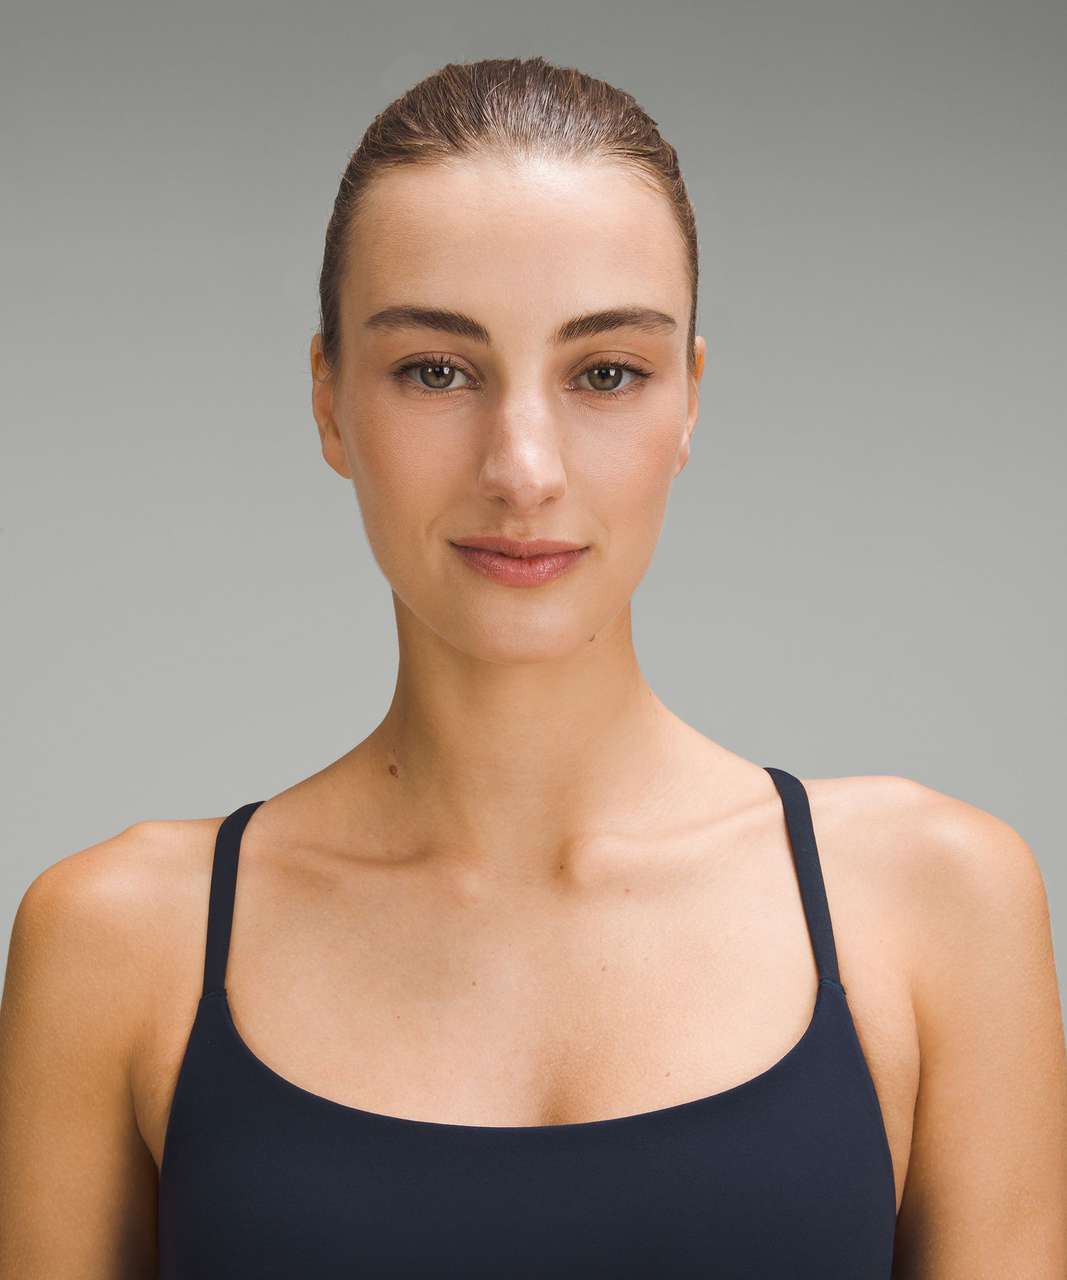 Lululemon Wunder Train Strappy Racer Bra Light Support, A/B Cup